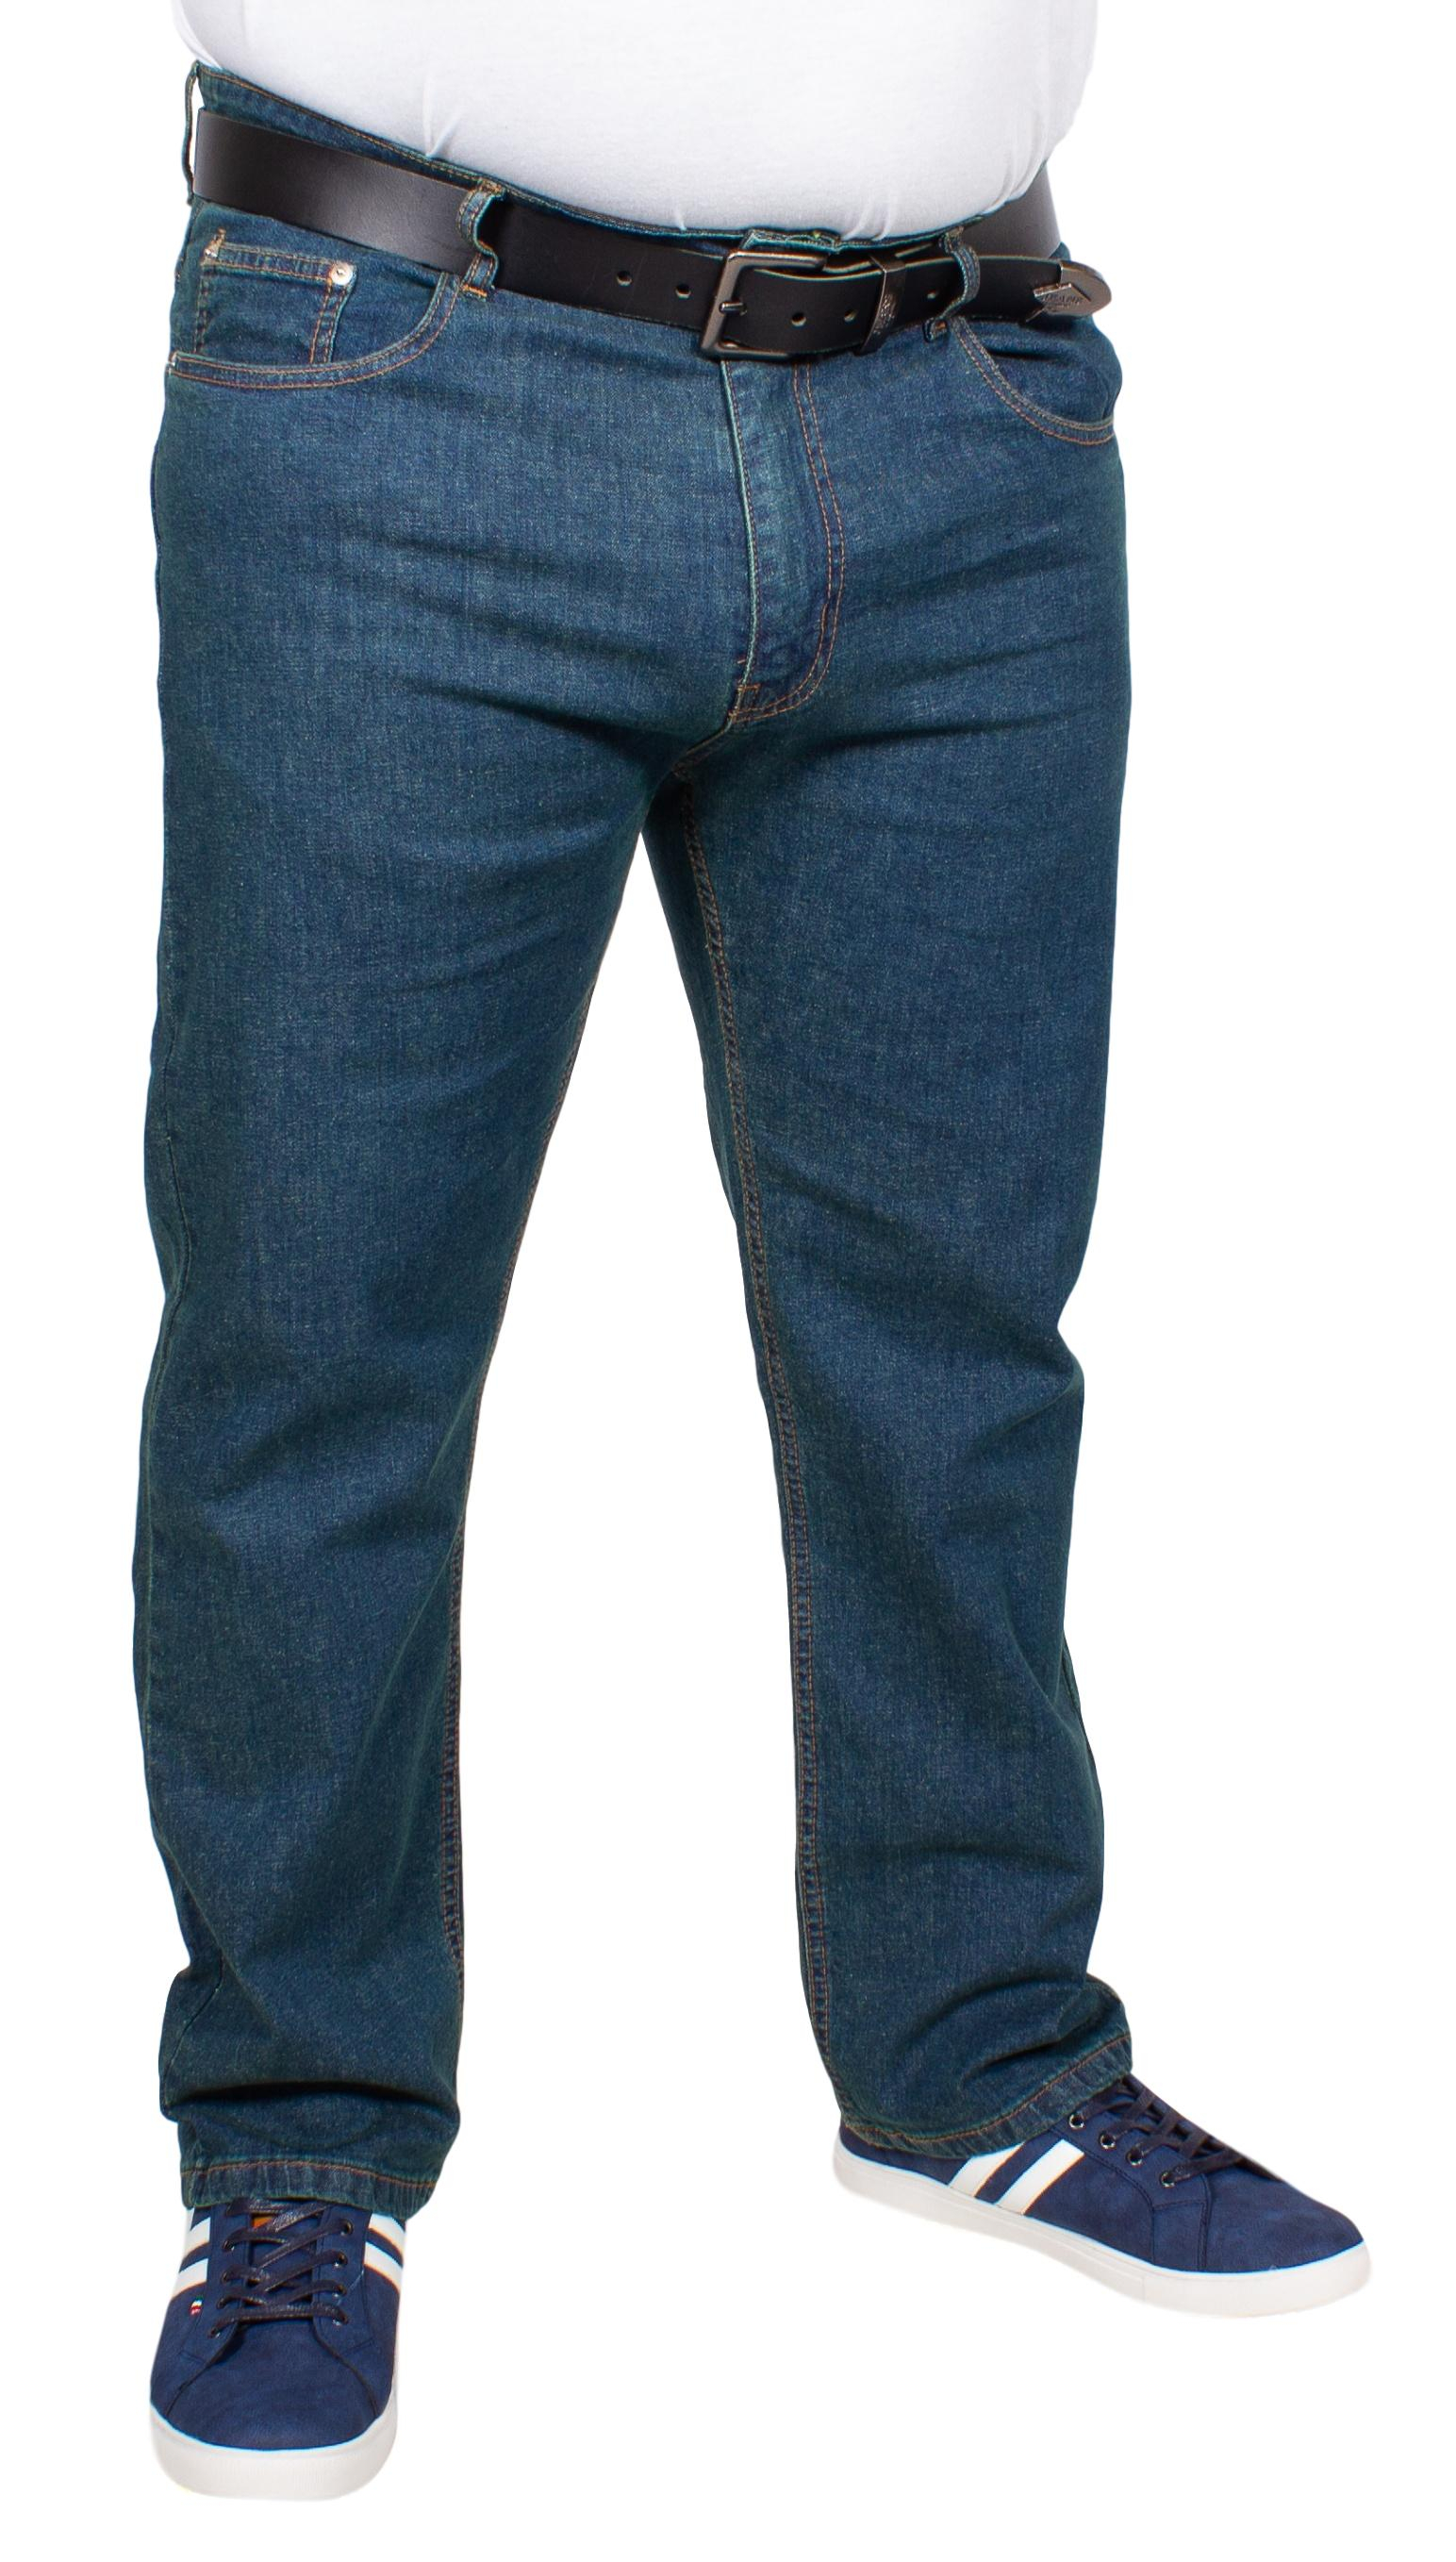 comfortable jeans for fat guys